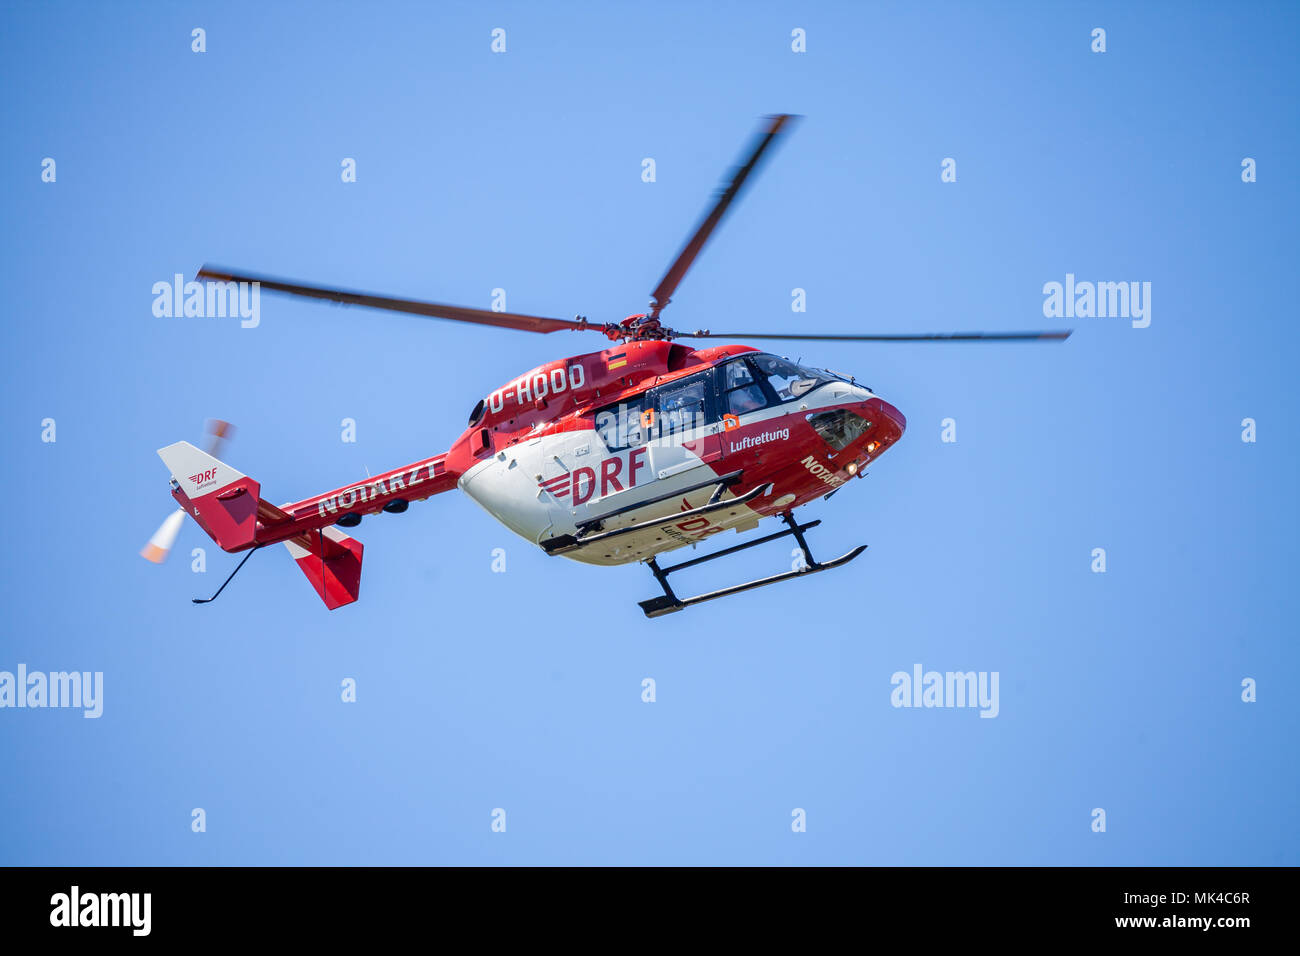 DELMENHORST / GERMANY - MAY 06, 2018: Eurocopter BK-117 from DRF Luftrettung flies over landing side. Notarzt means emergency doctor. Stock Photo